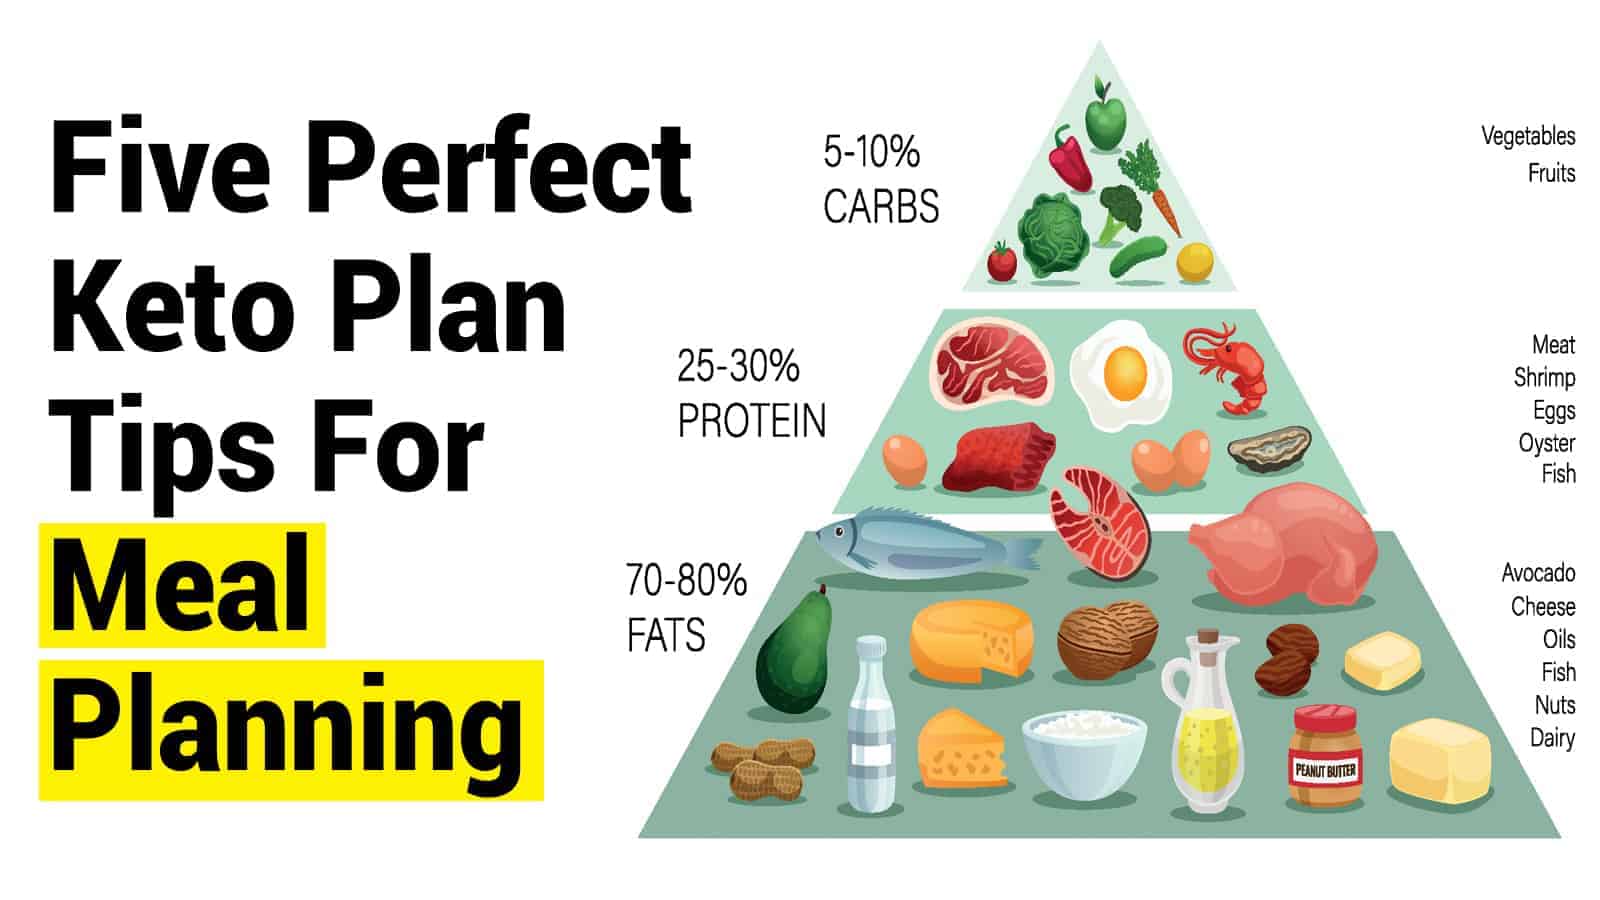 Five Perfect Keto Plan Tips for Meal Planning